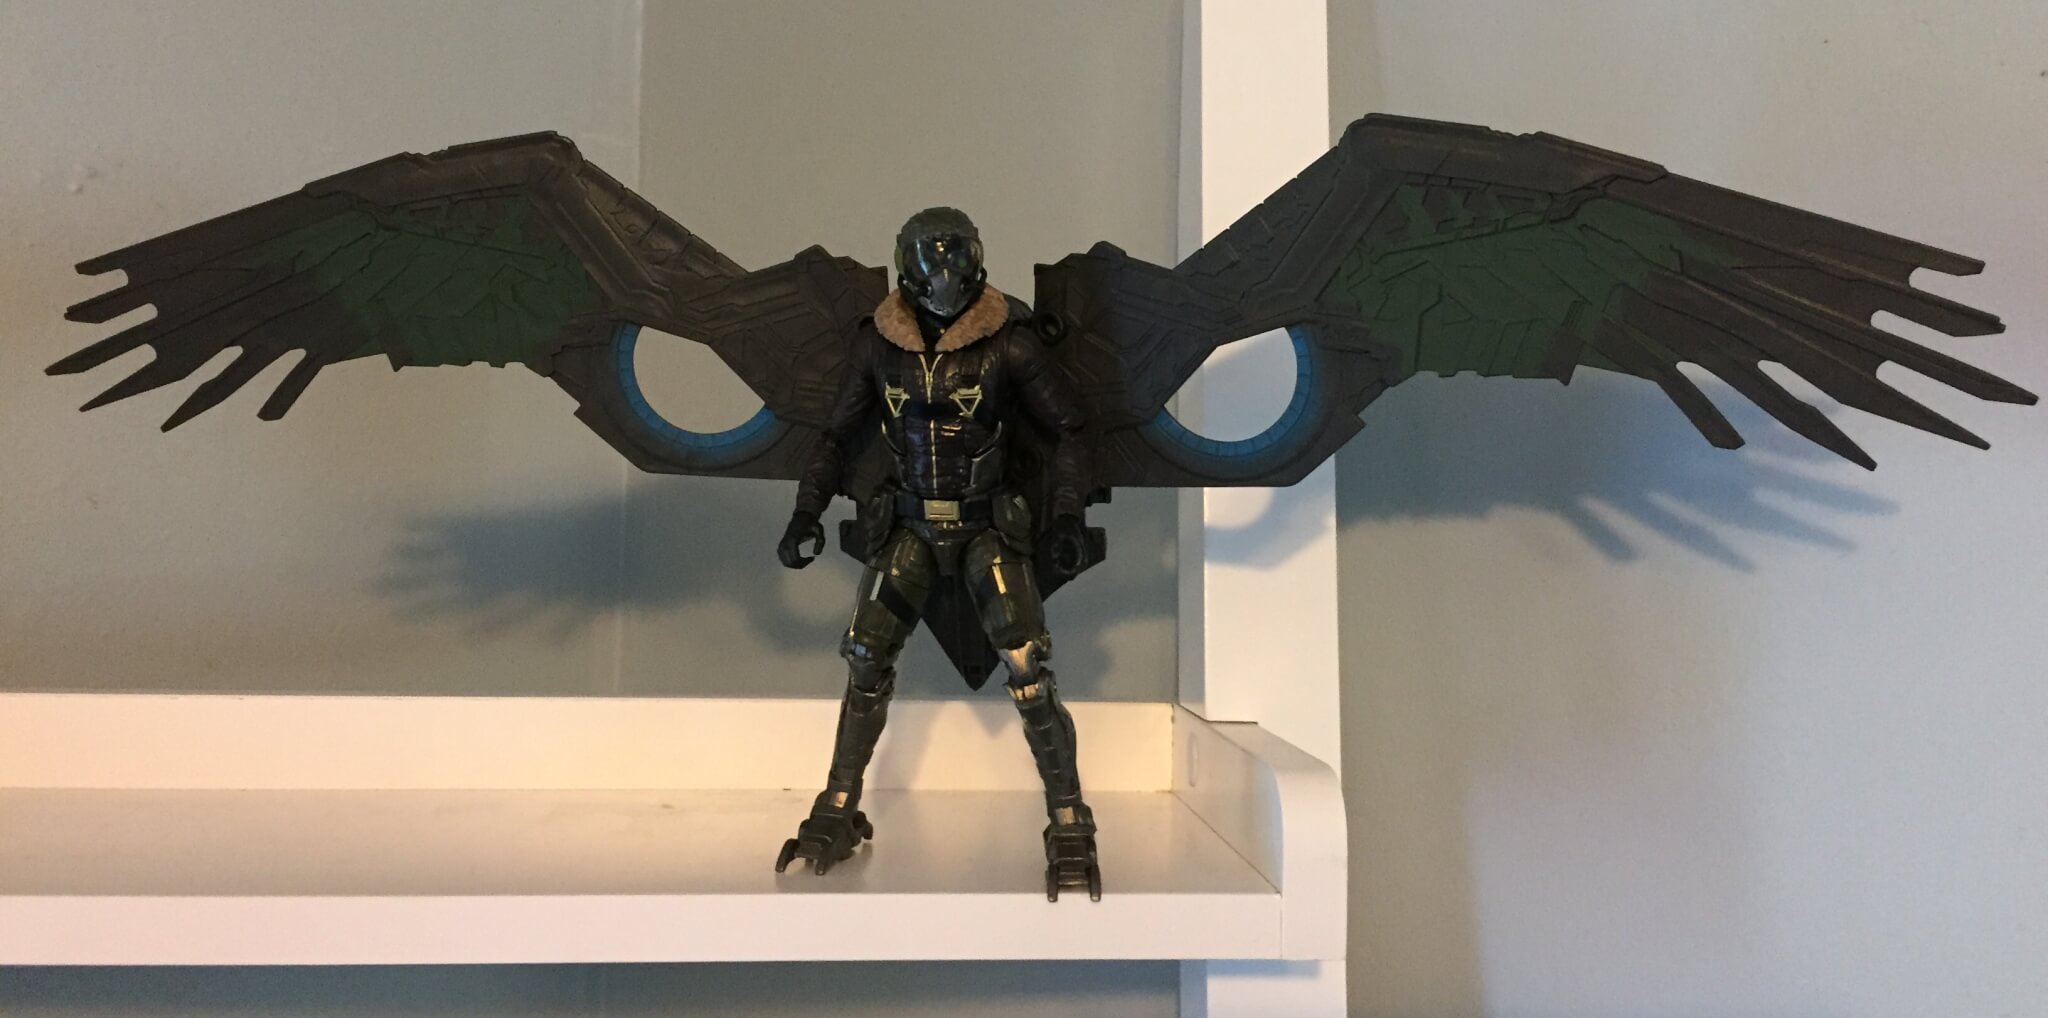 Hasbro Spider-Man Homecoming Vulture figure with cheap wings